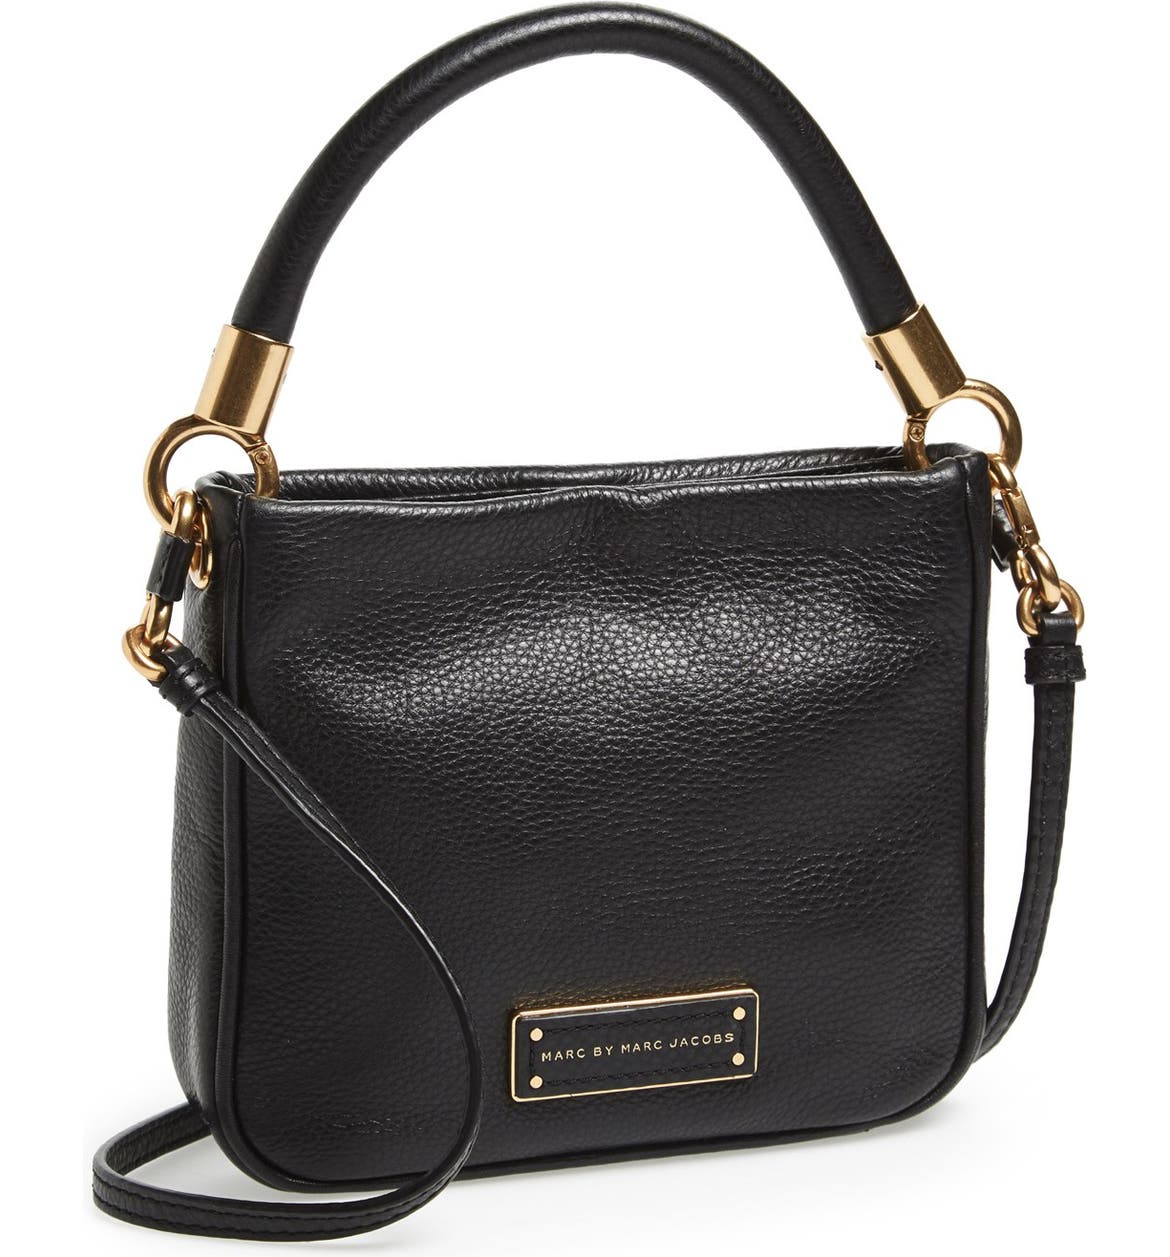 MARC BY MARC JACOBS 'Too Hot to Handle' Crossbody Bag | Nordstrom